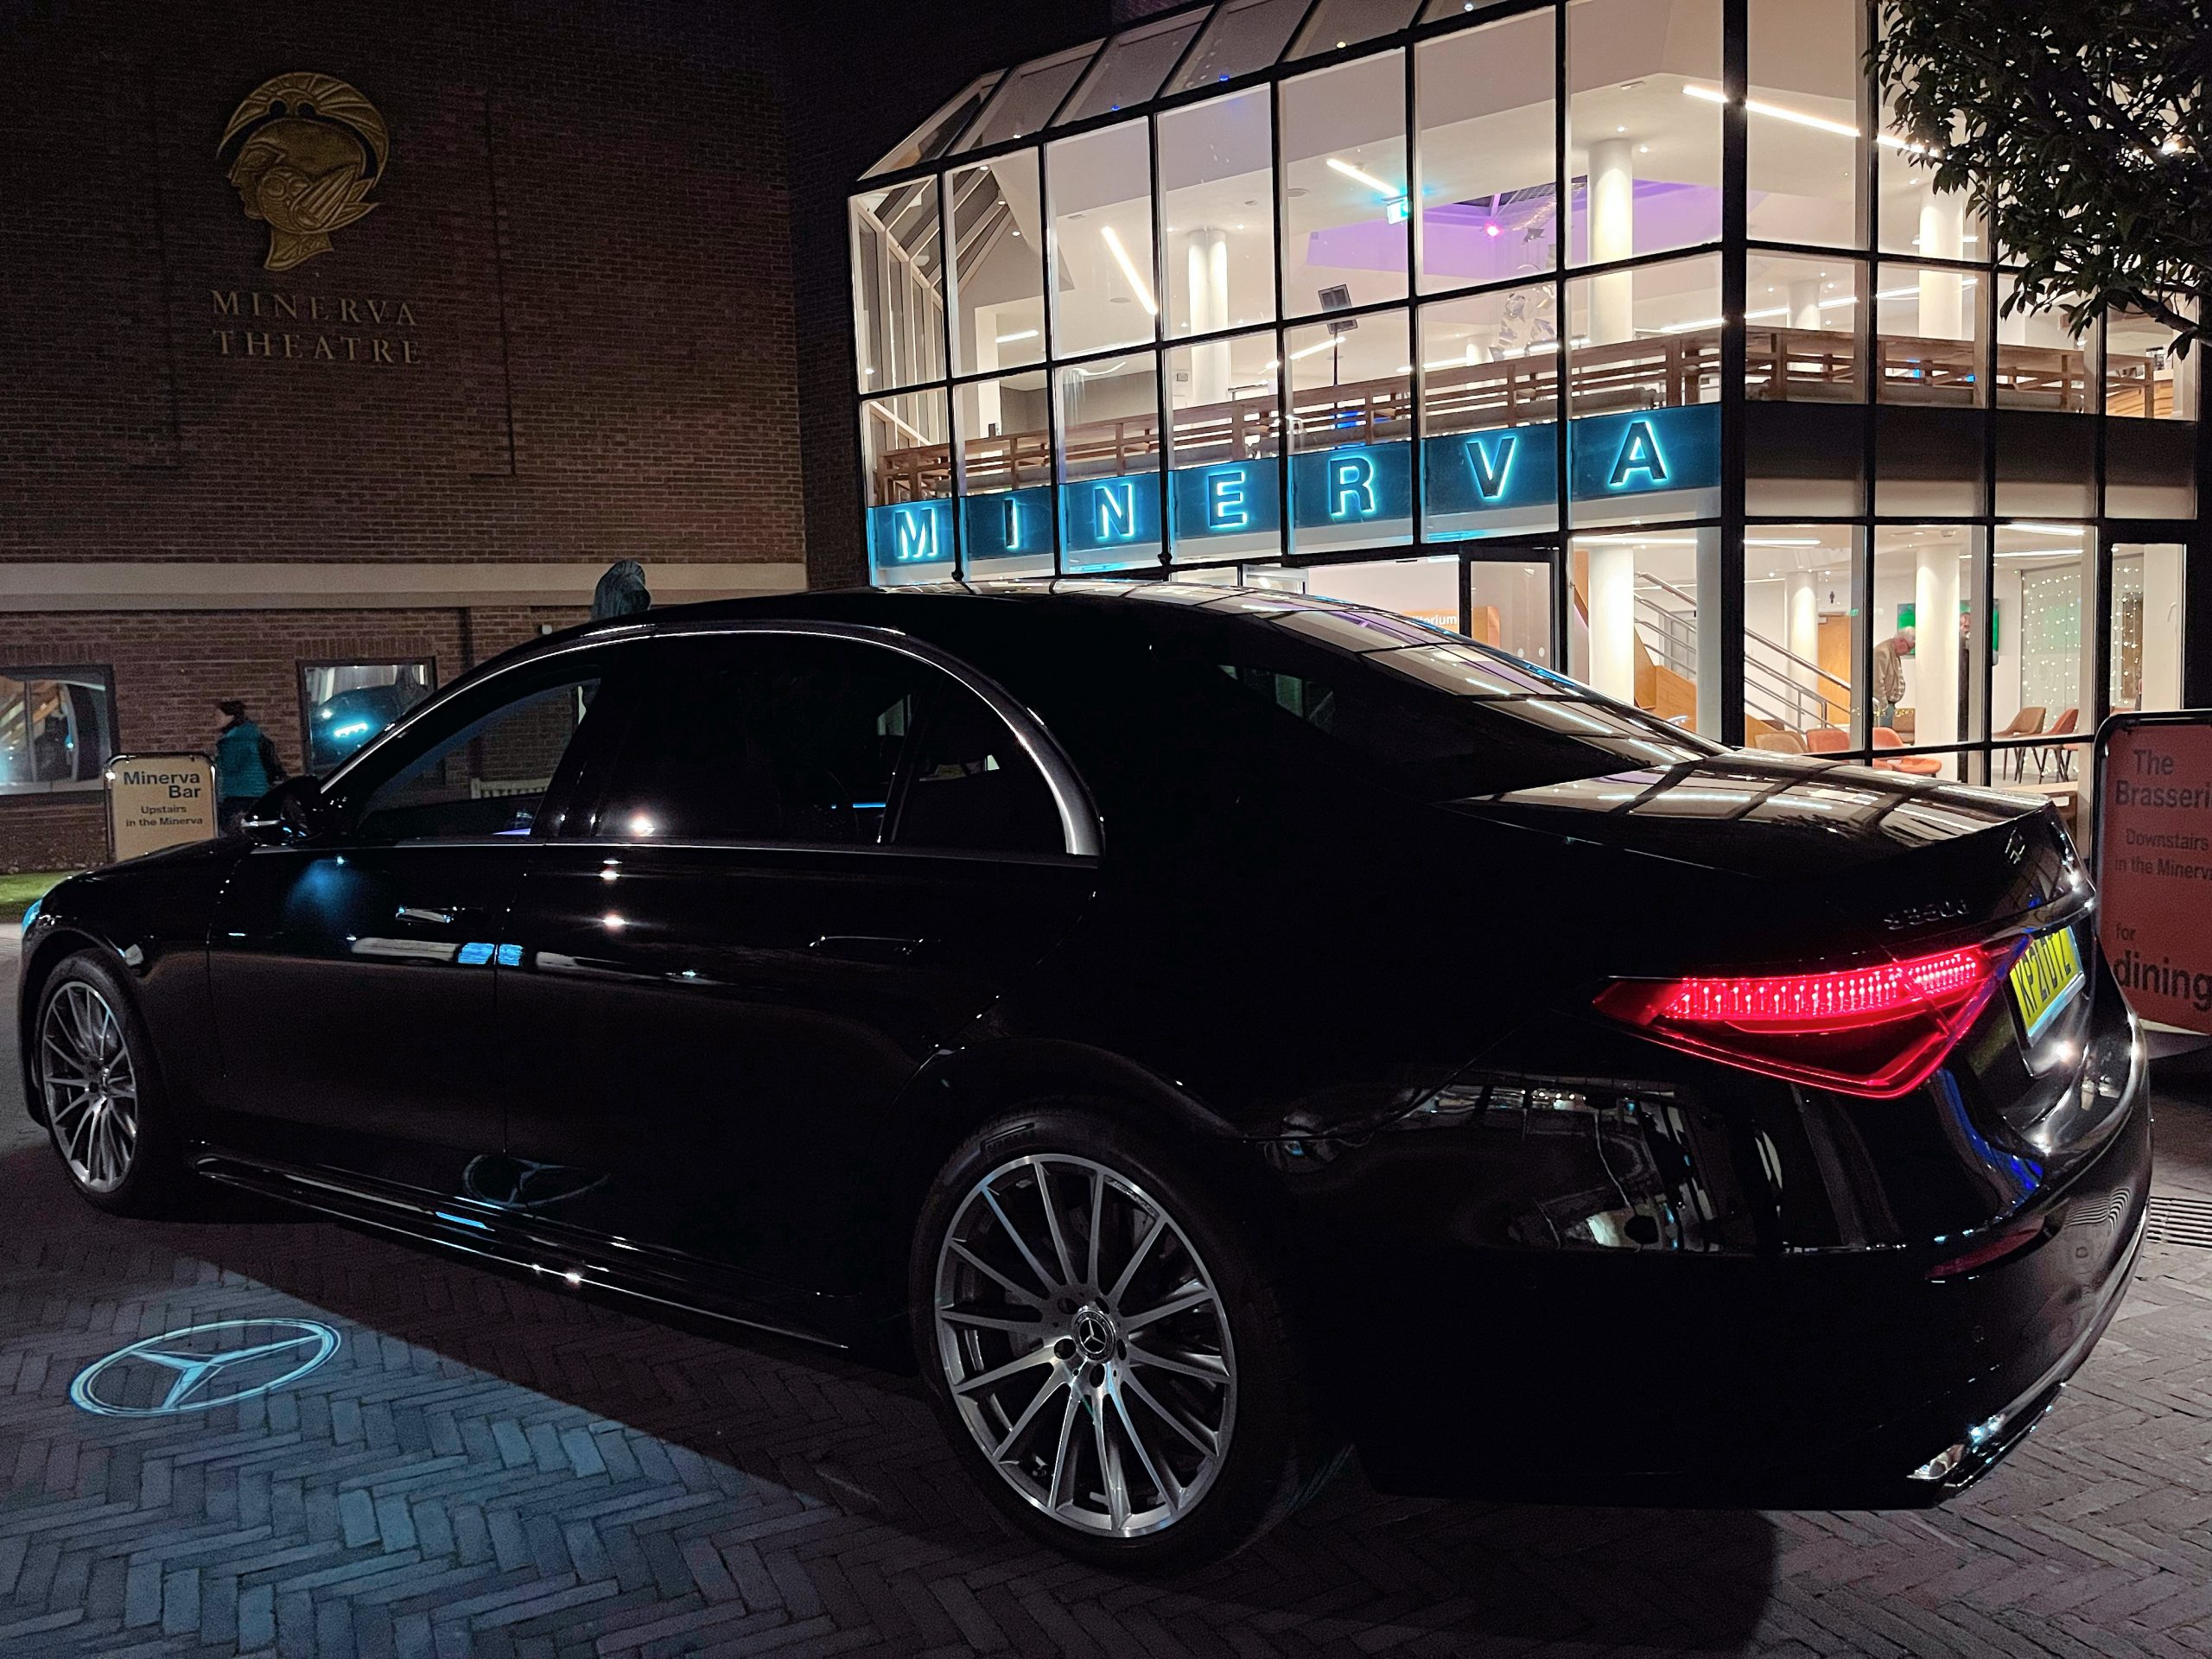 Chauffeured Business Travel Between Stratford upon Avon and Chichester Theatre